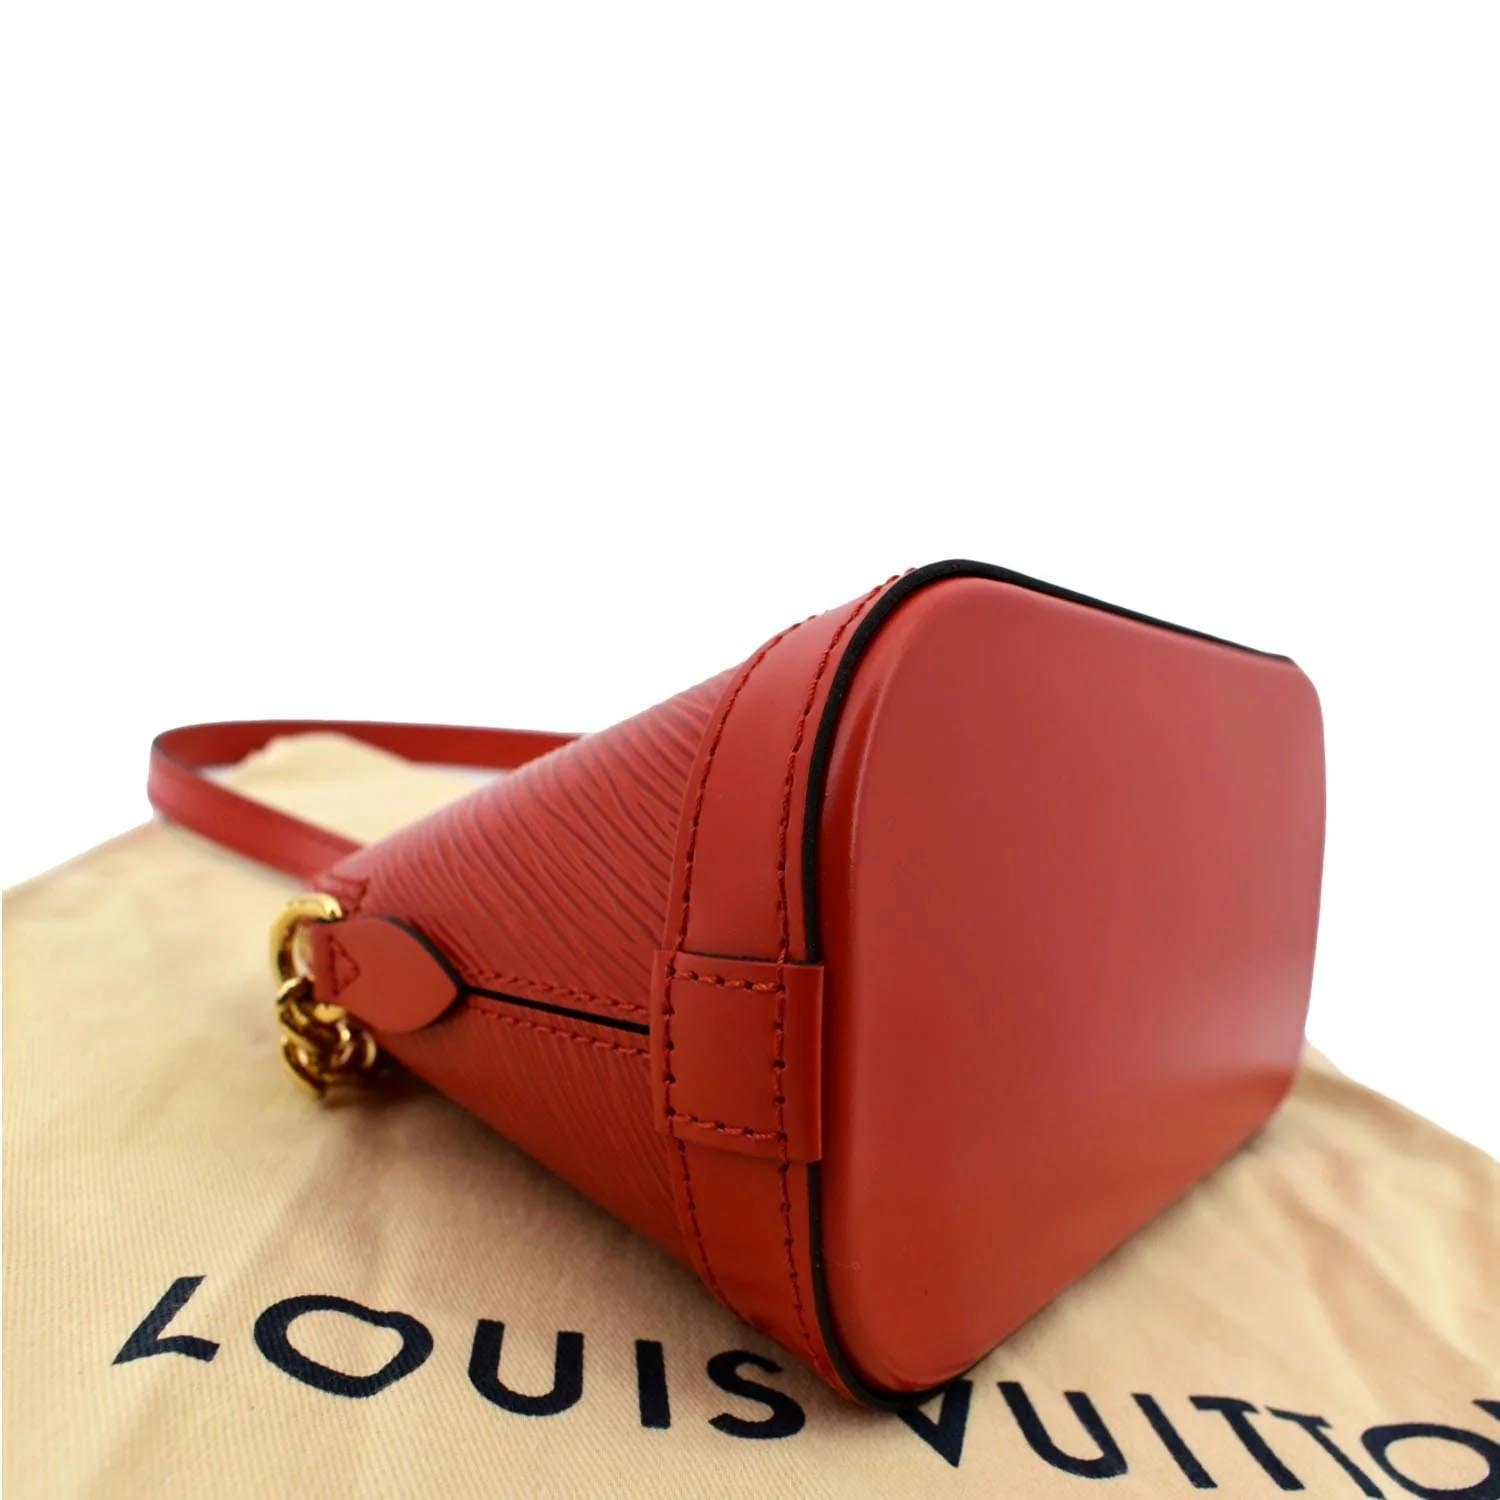 Louis Vuitton Red Bags & Handbags for Women, Authenticity Guaranteed